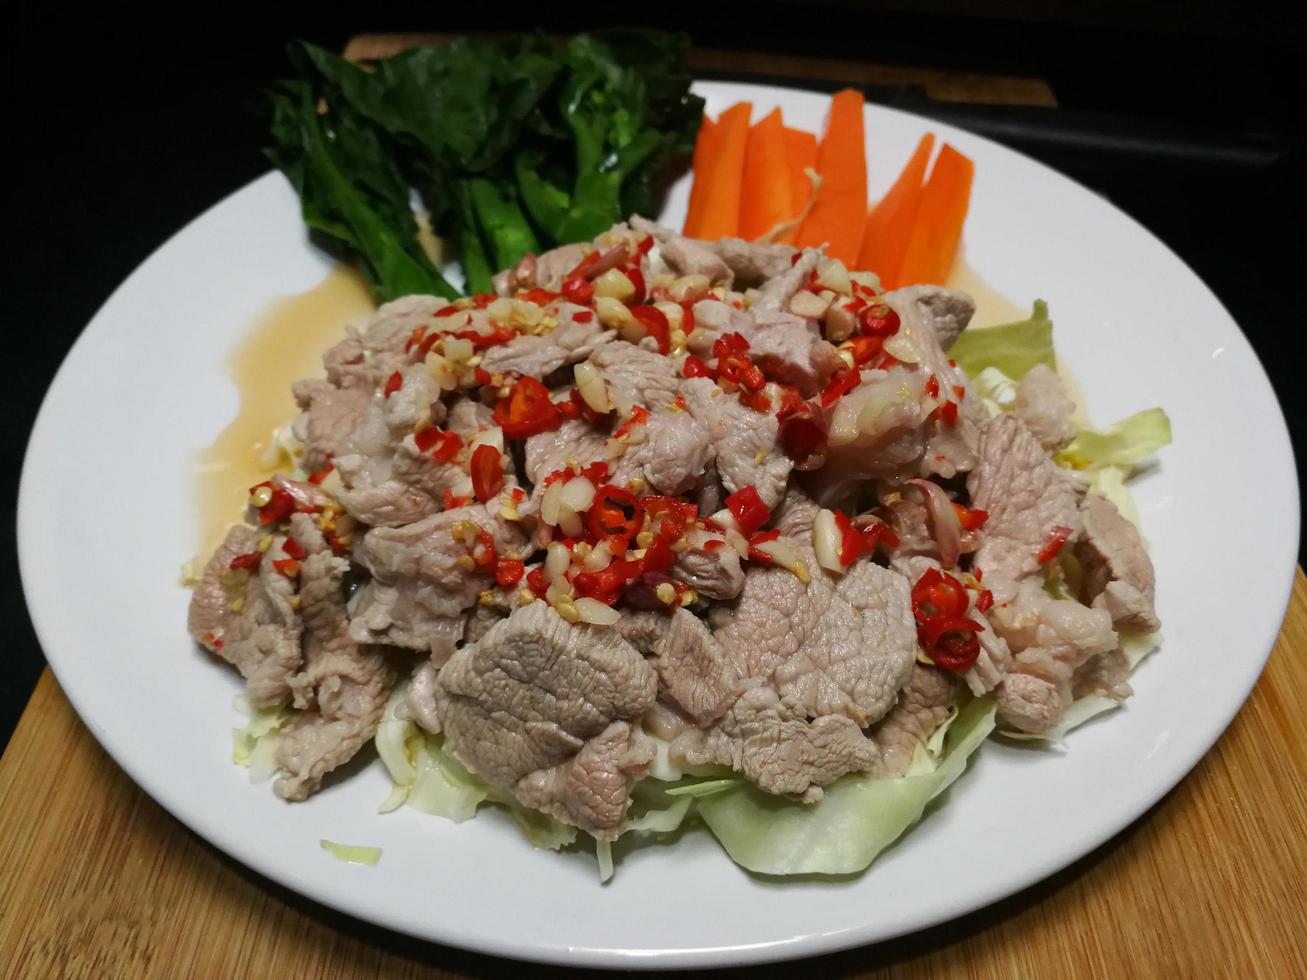 Pork with Lemon spicy-sweet sauce with chili and garlic mixed with sour lemon juice. Arrange the dish with kale and carrots on a white plate placed on a wooden chopping board. photo